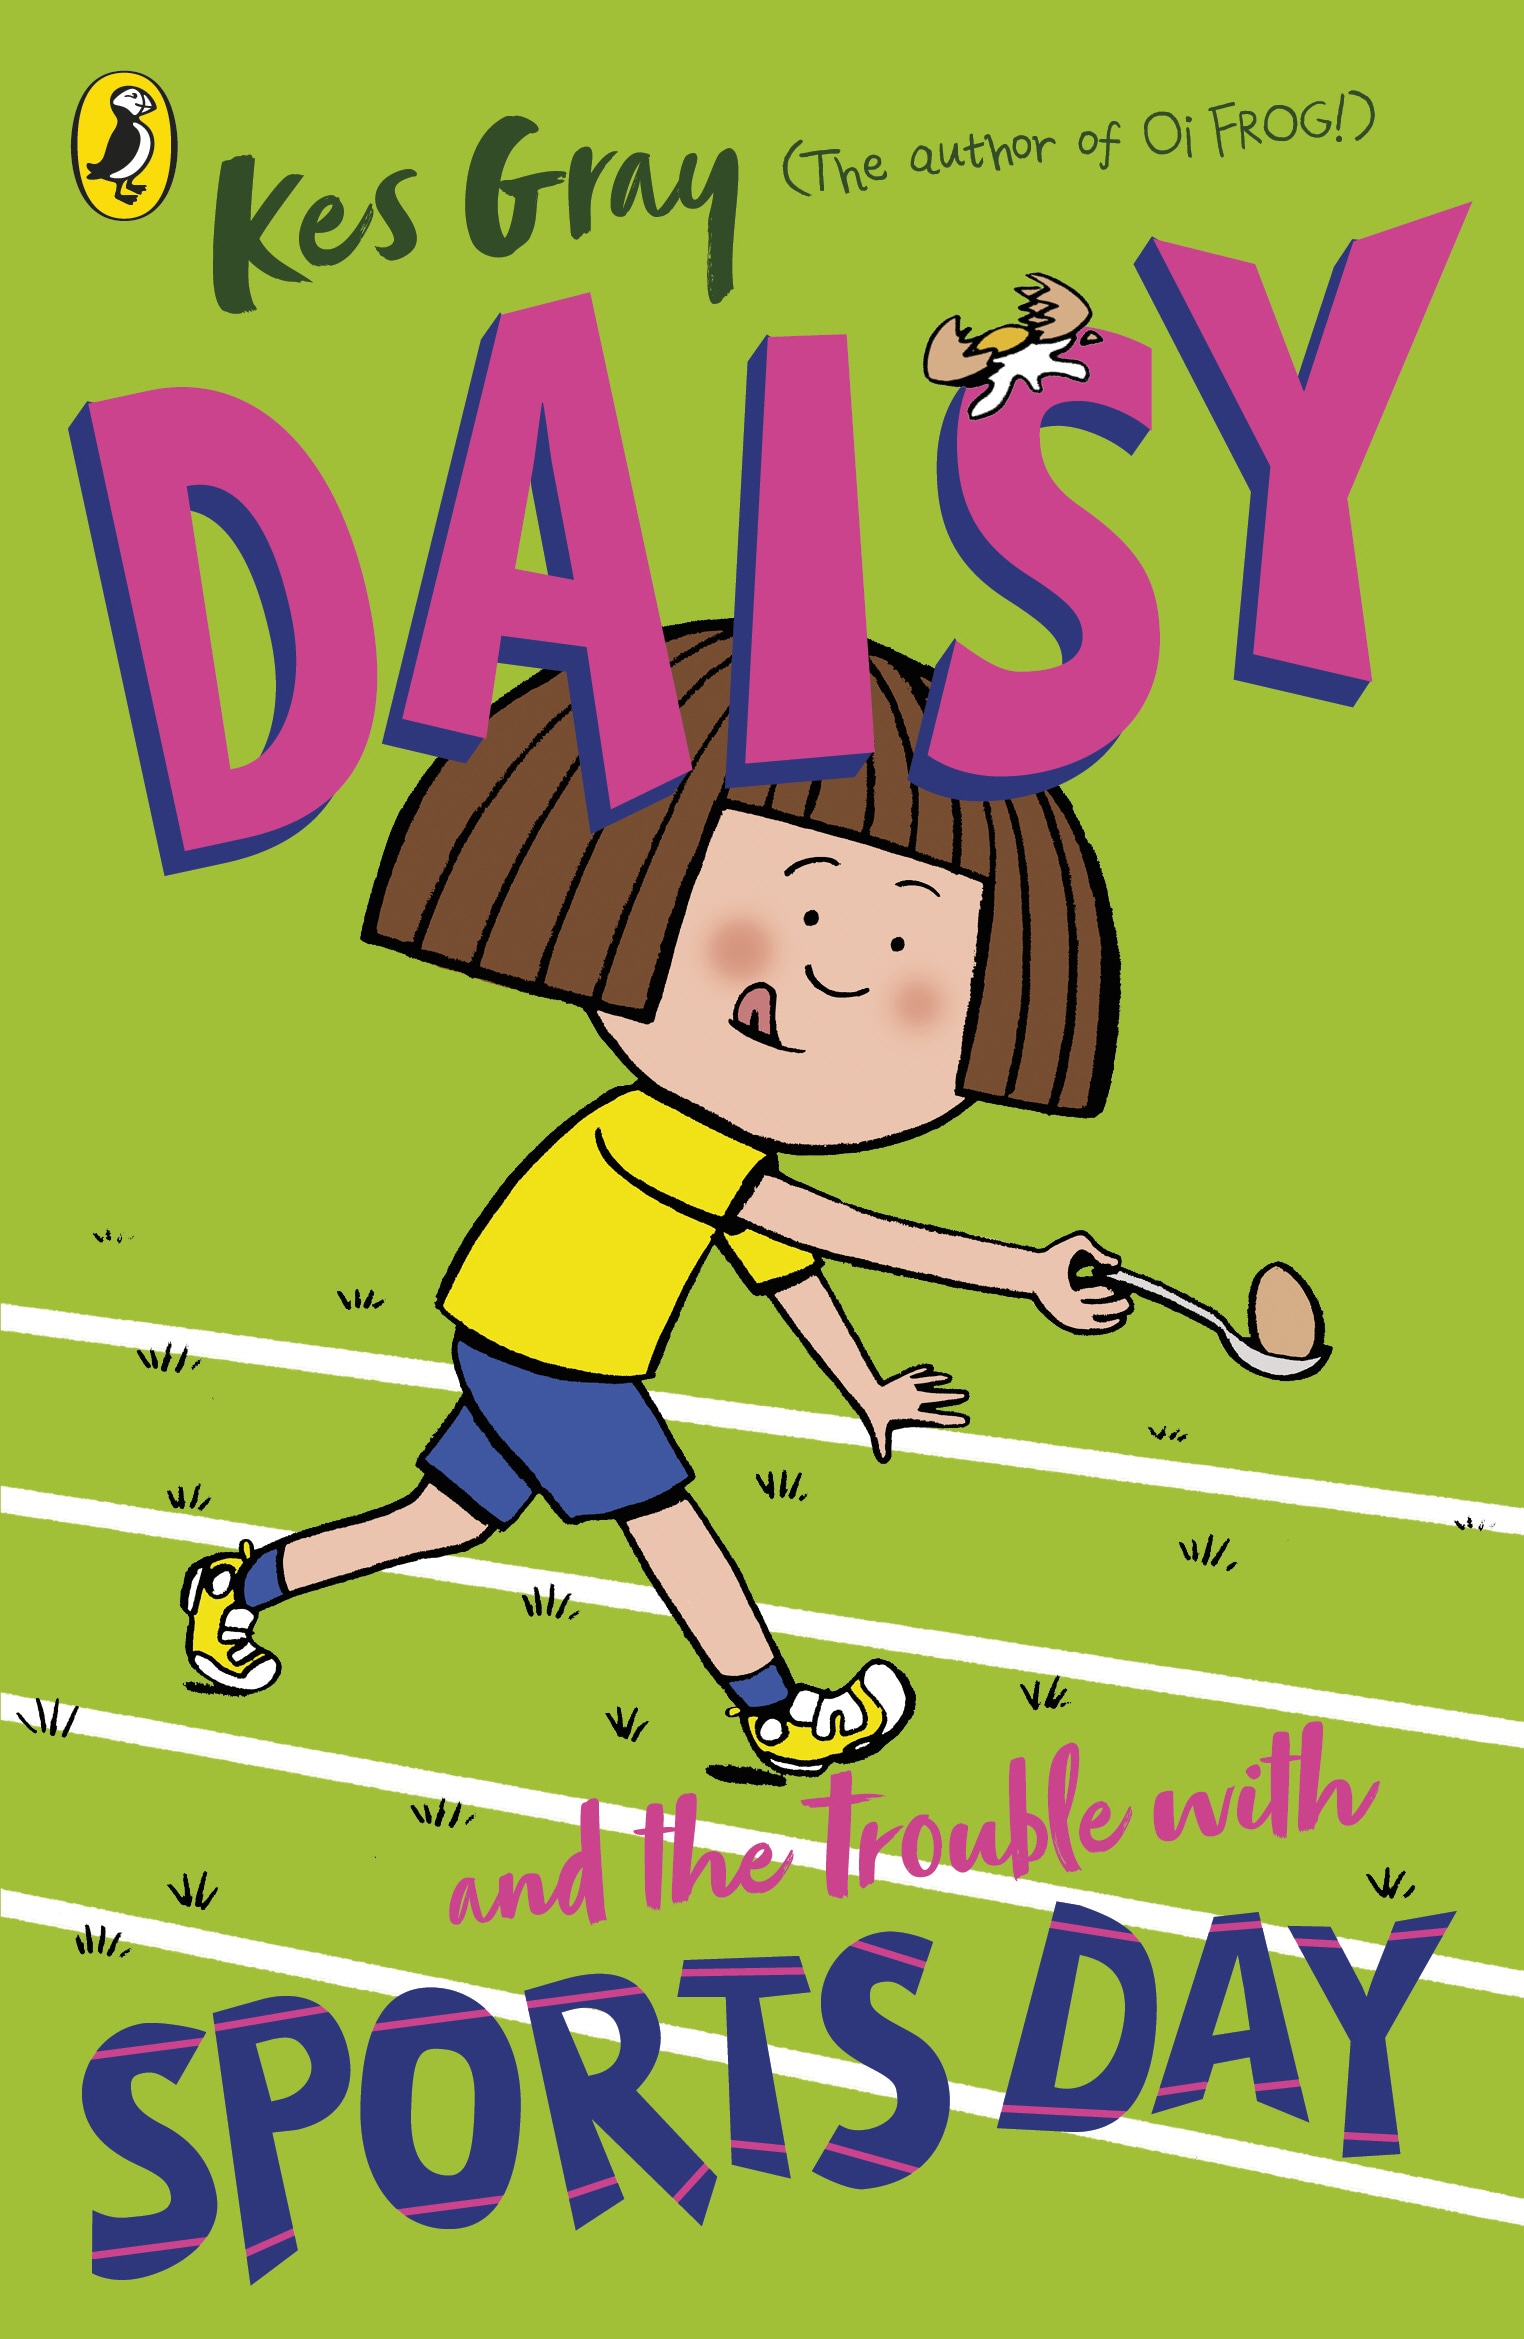 Book “Daisy and the Trouble with Sports Day” by Kes Gray — July 9, 2020